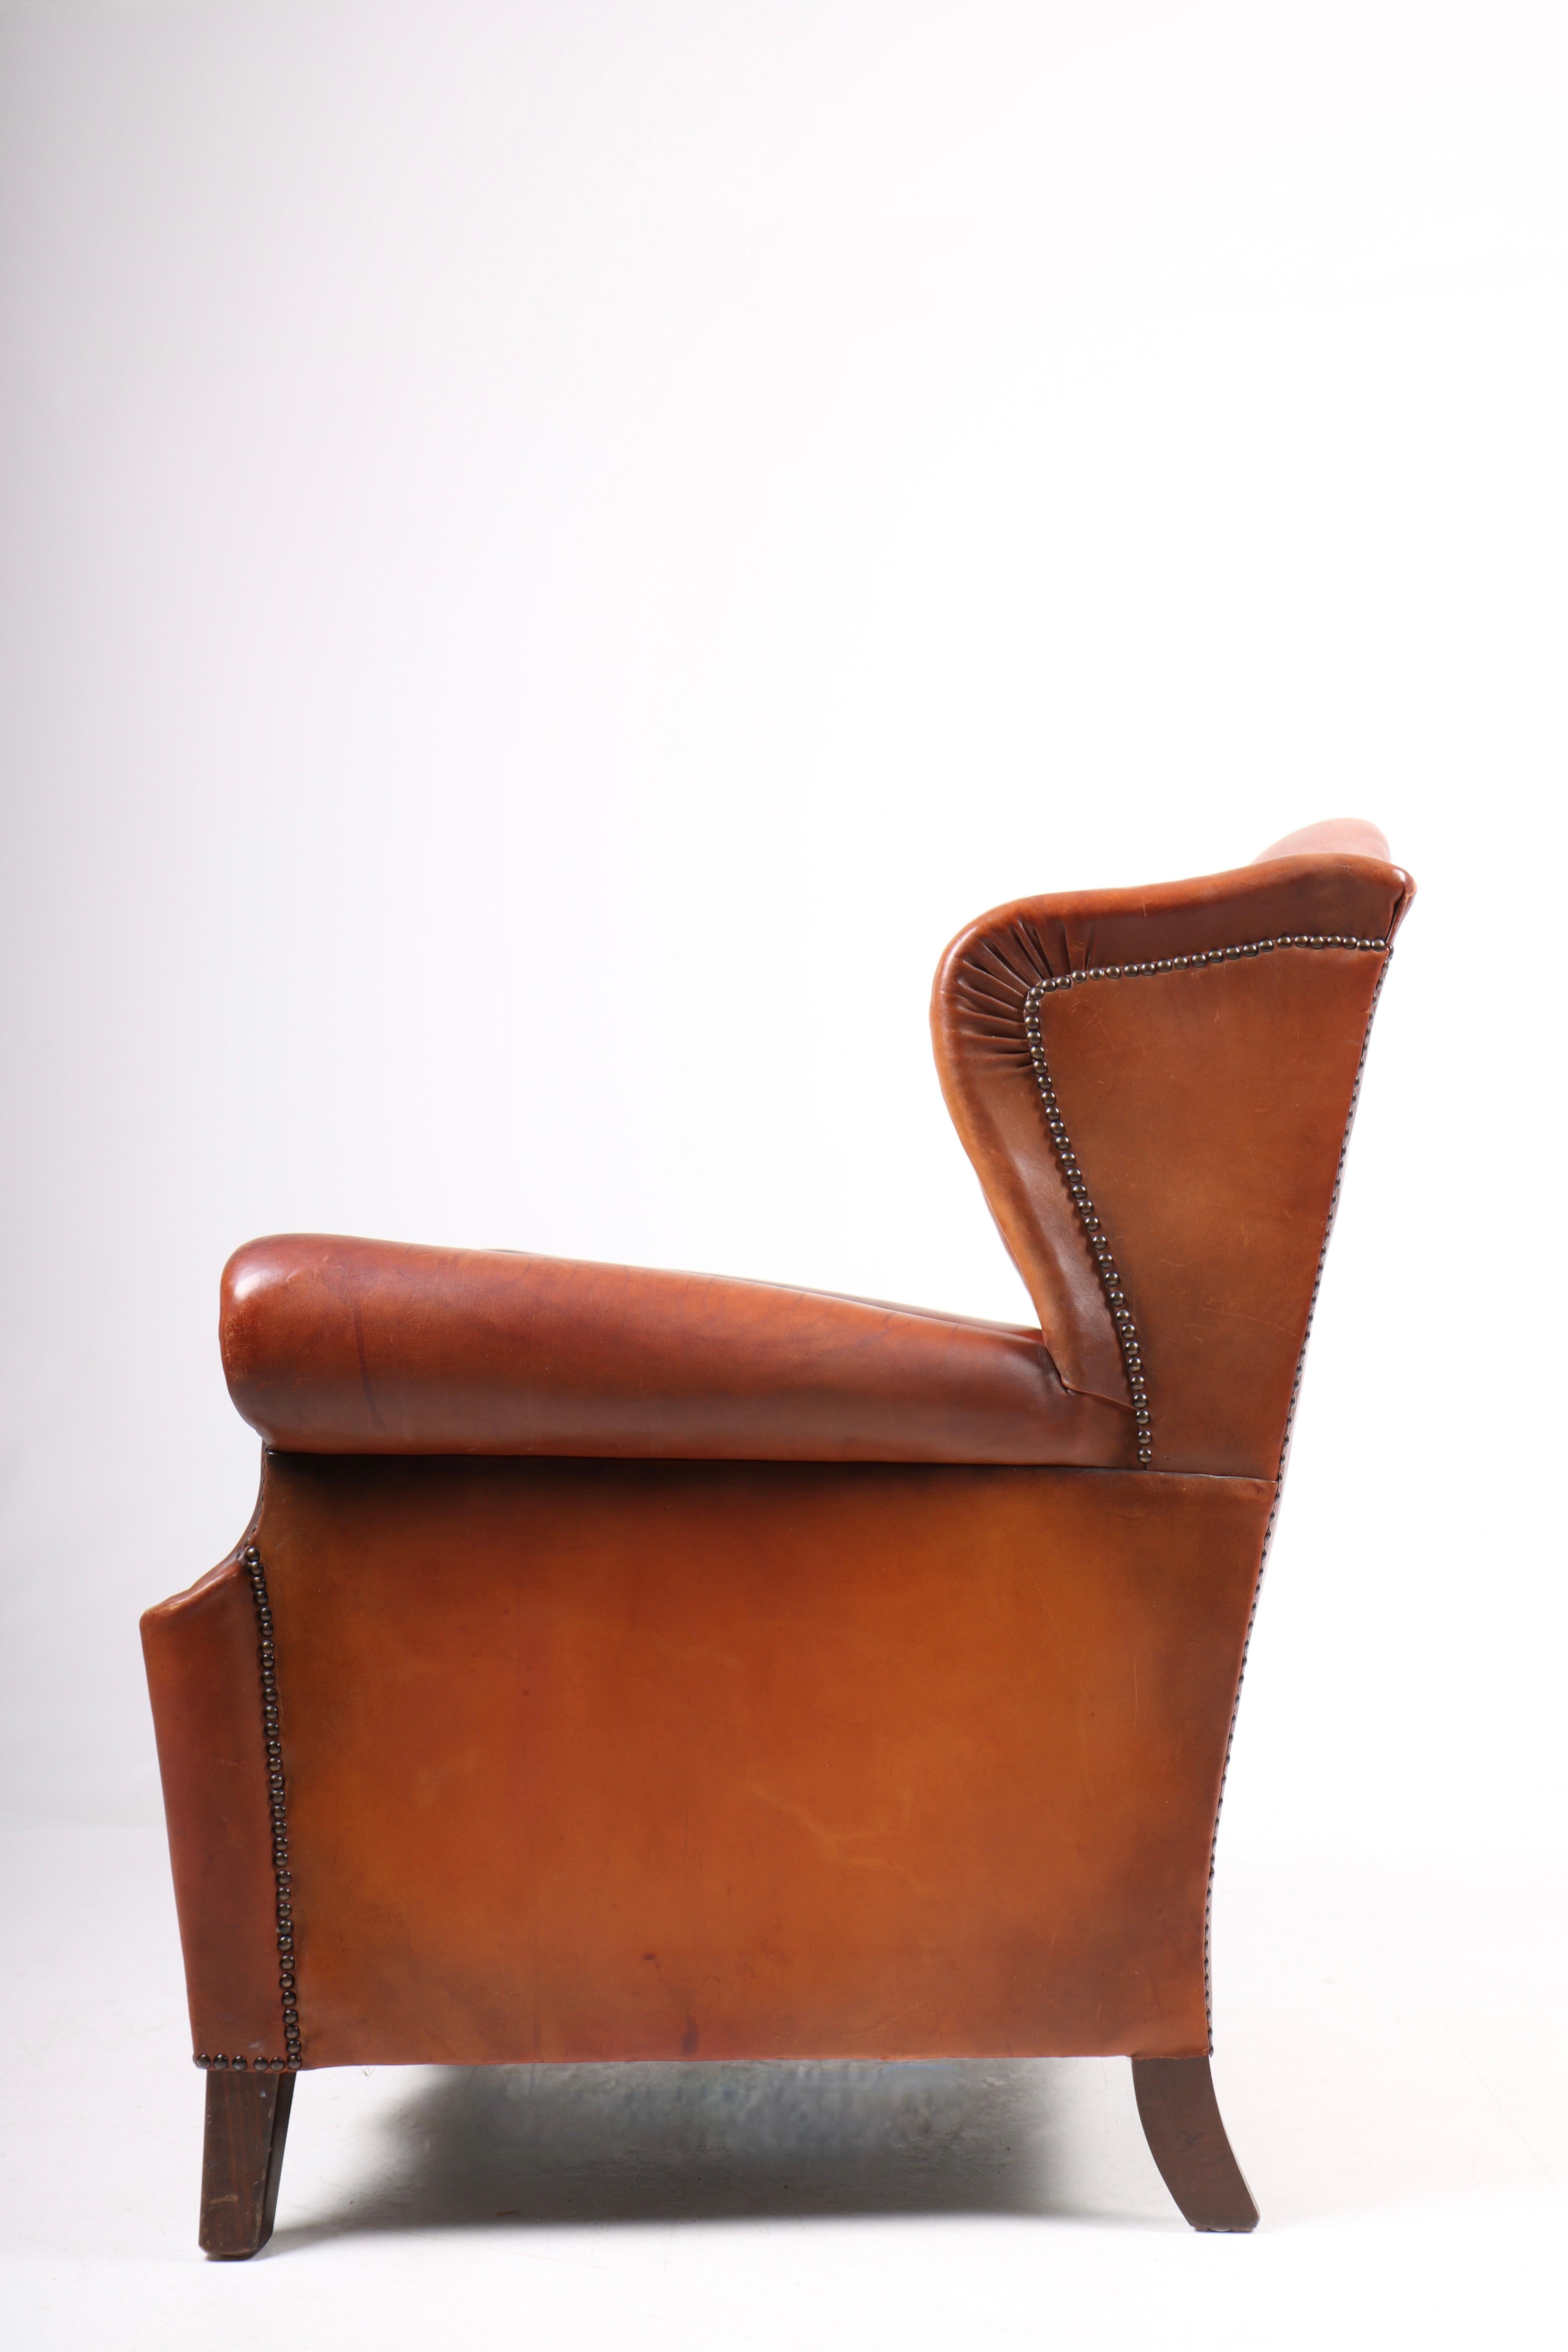 Danish Wingback Chair in Cognac Leather, Denmark, 1940s For Sale